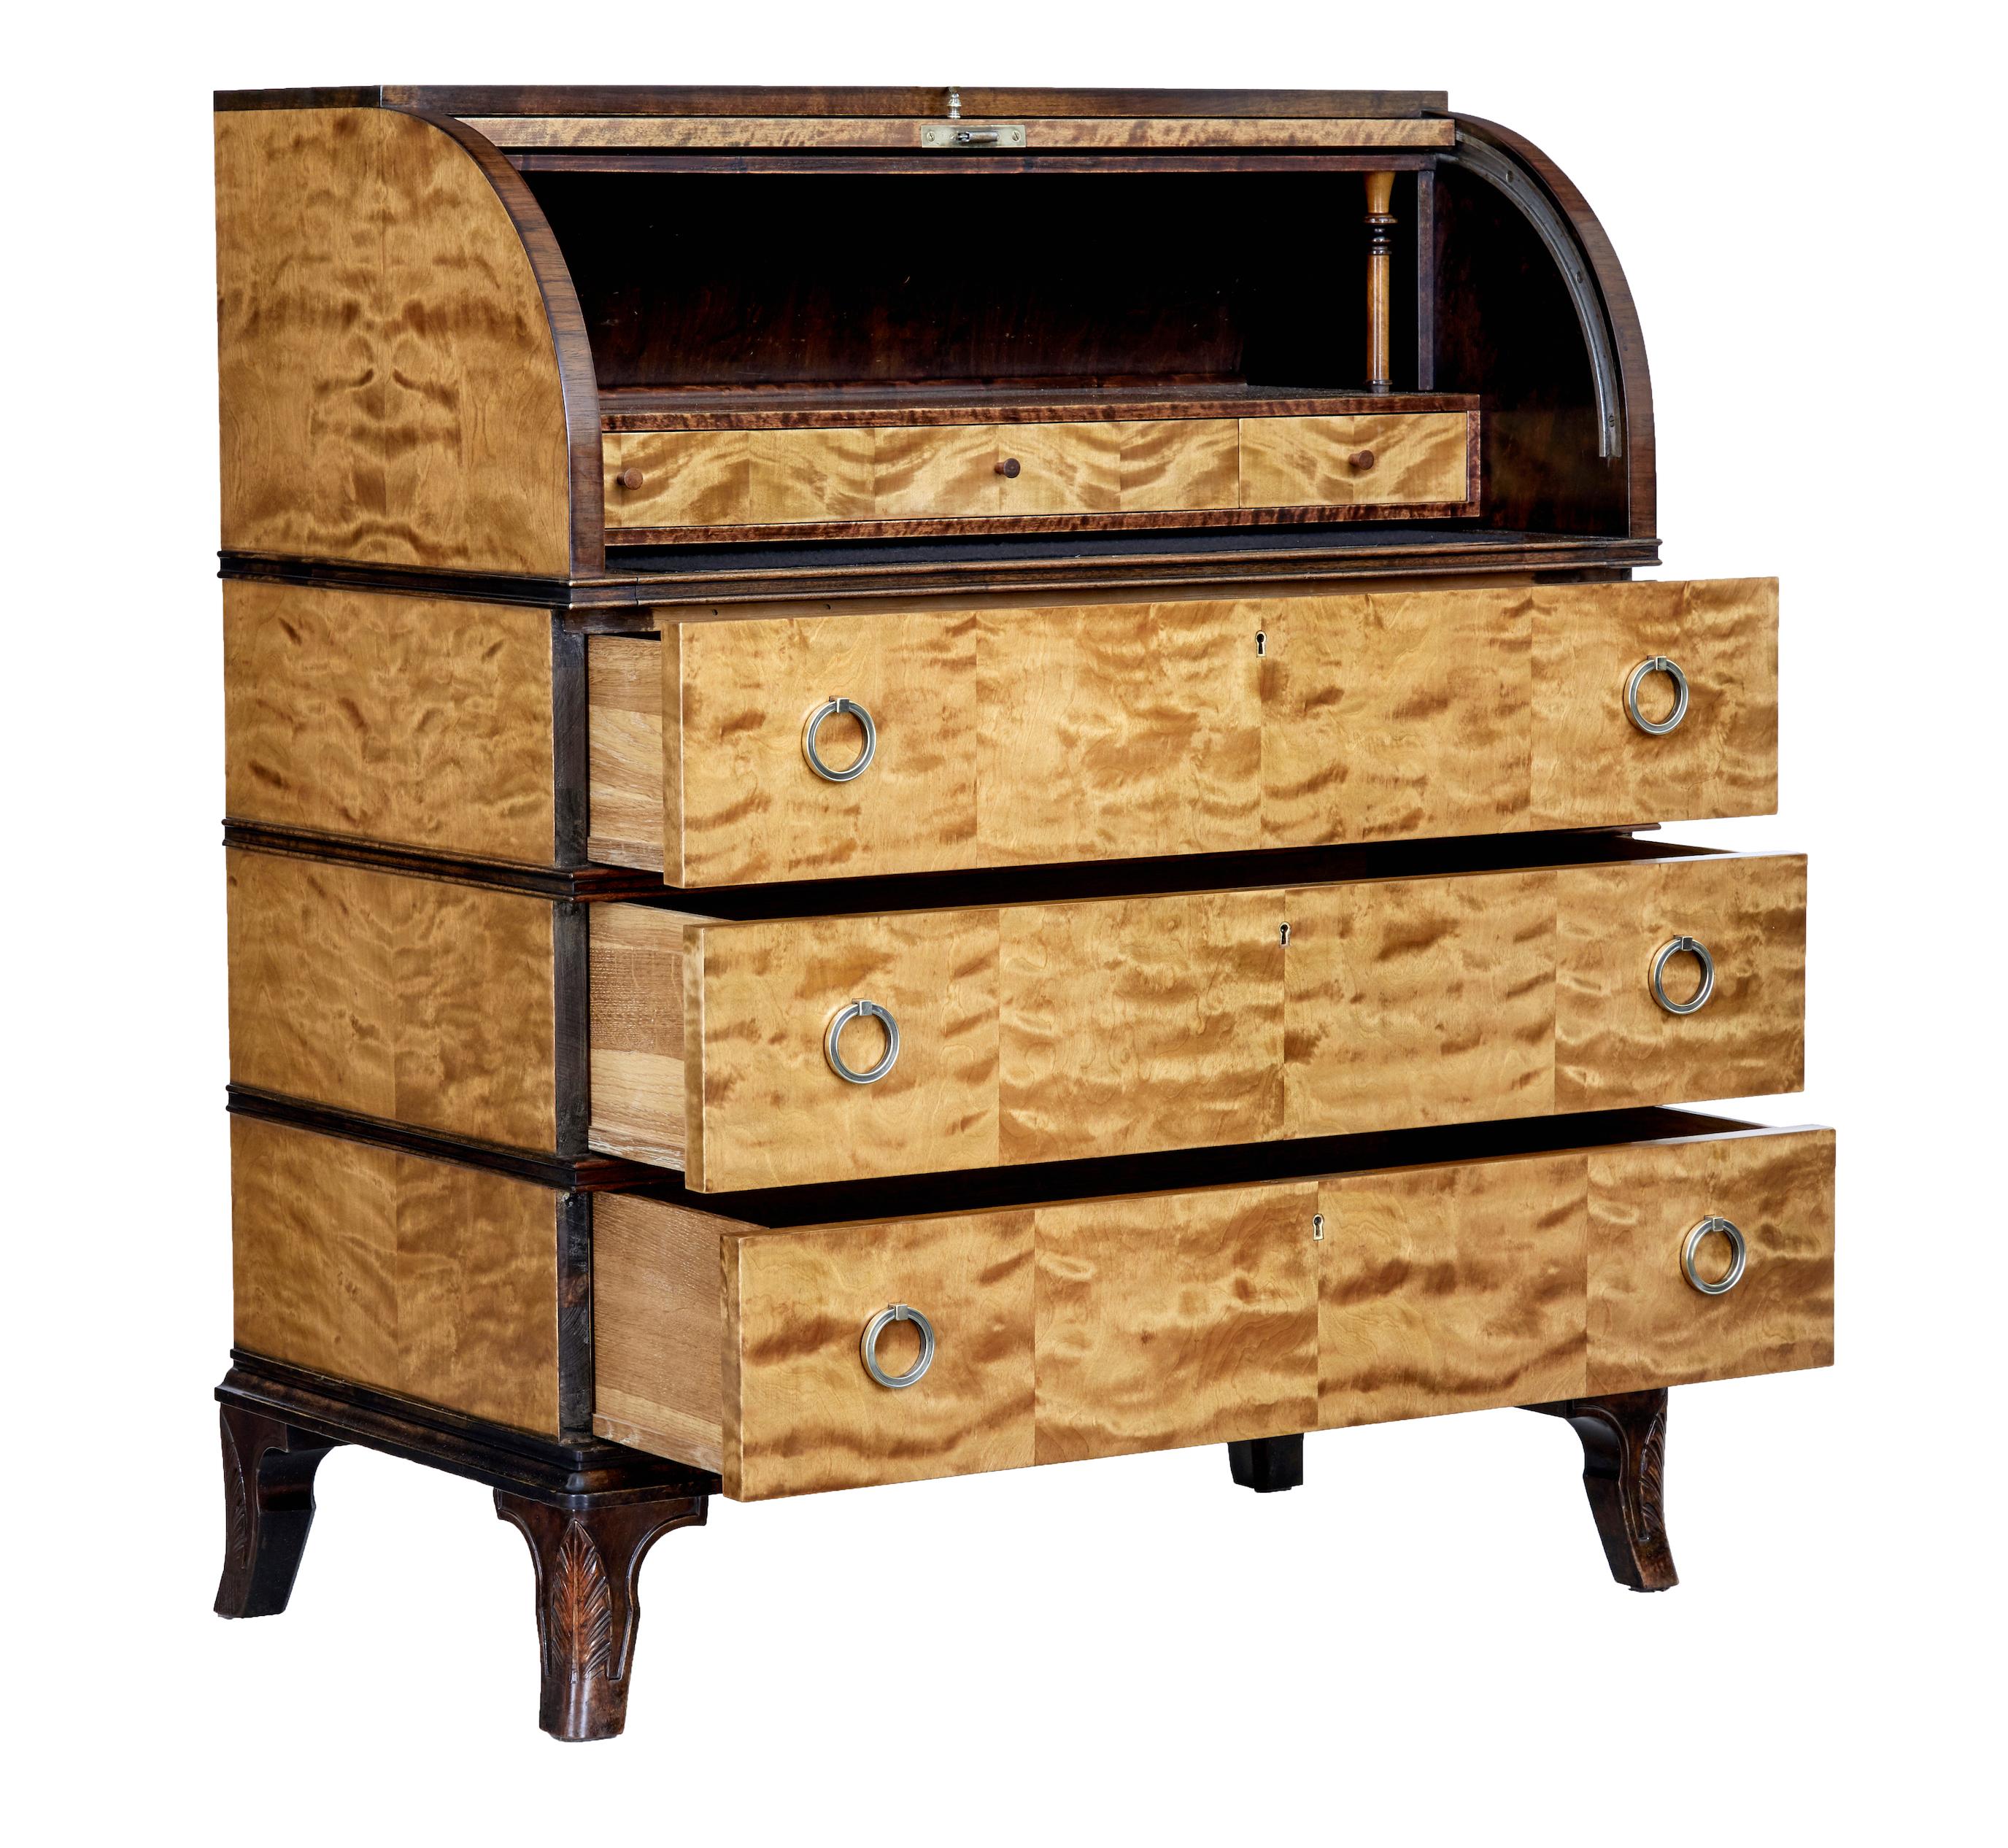 20th century inlaid birch Swedish grace bureau, circa 1930.

Fine example of Swedish grace furniture, typical with its flowing lines with added romantic motifs.

Contrasting dark birch top surface, below which the fall with central matched flame